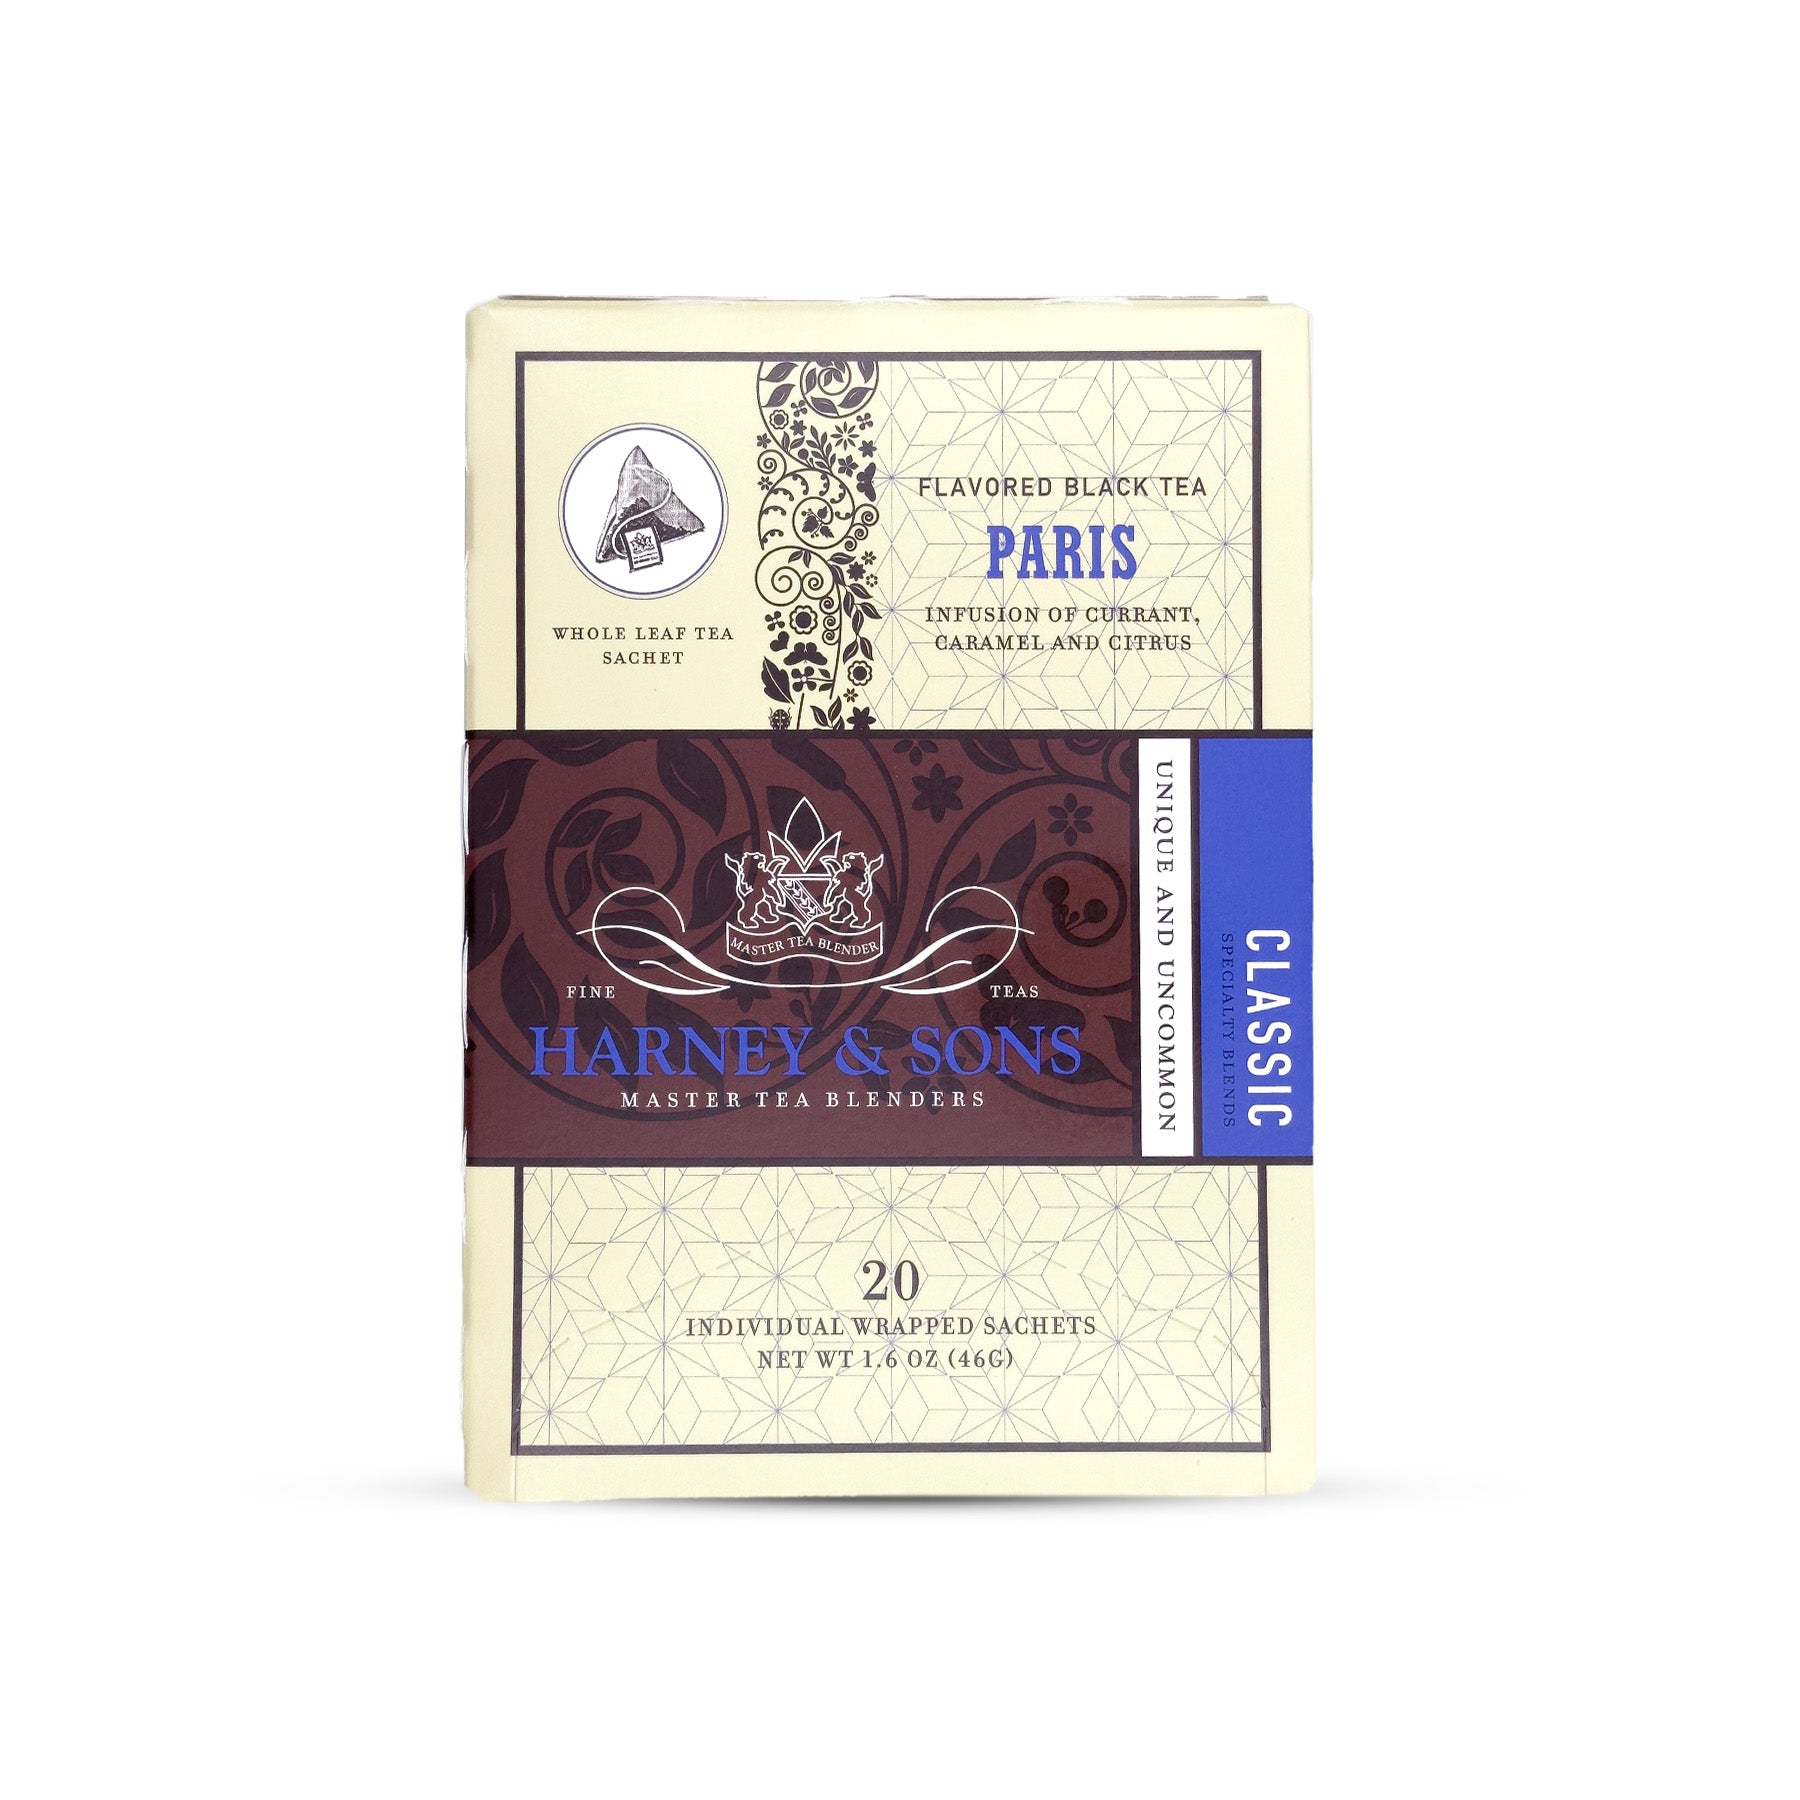 Paris - Box of 20 Individually Wrapped Sachets - Harney & Sons Fine Teas Europe